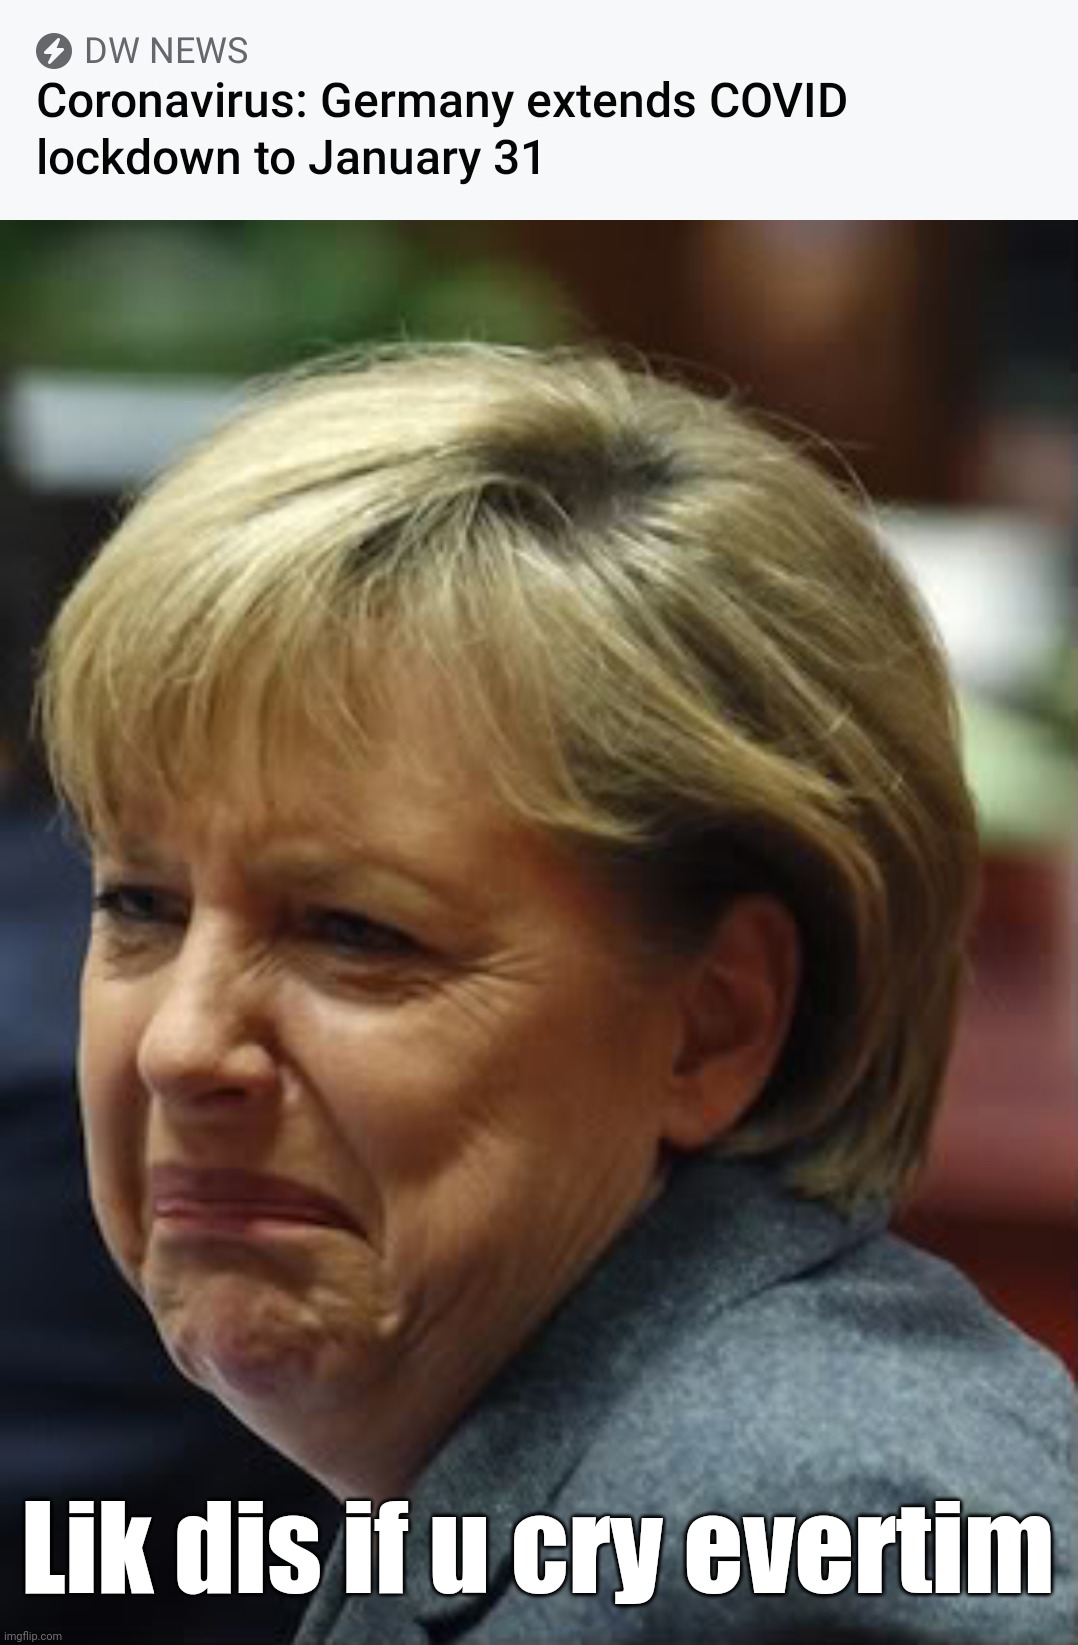 ToT | Lik dis if u cry evertim | image tagged in merkel crying,reeeeeeeeeeeeeeeeeeeeee,coronavirus,covid-19,germany | made w/ Imgflip meme maker